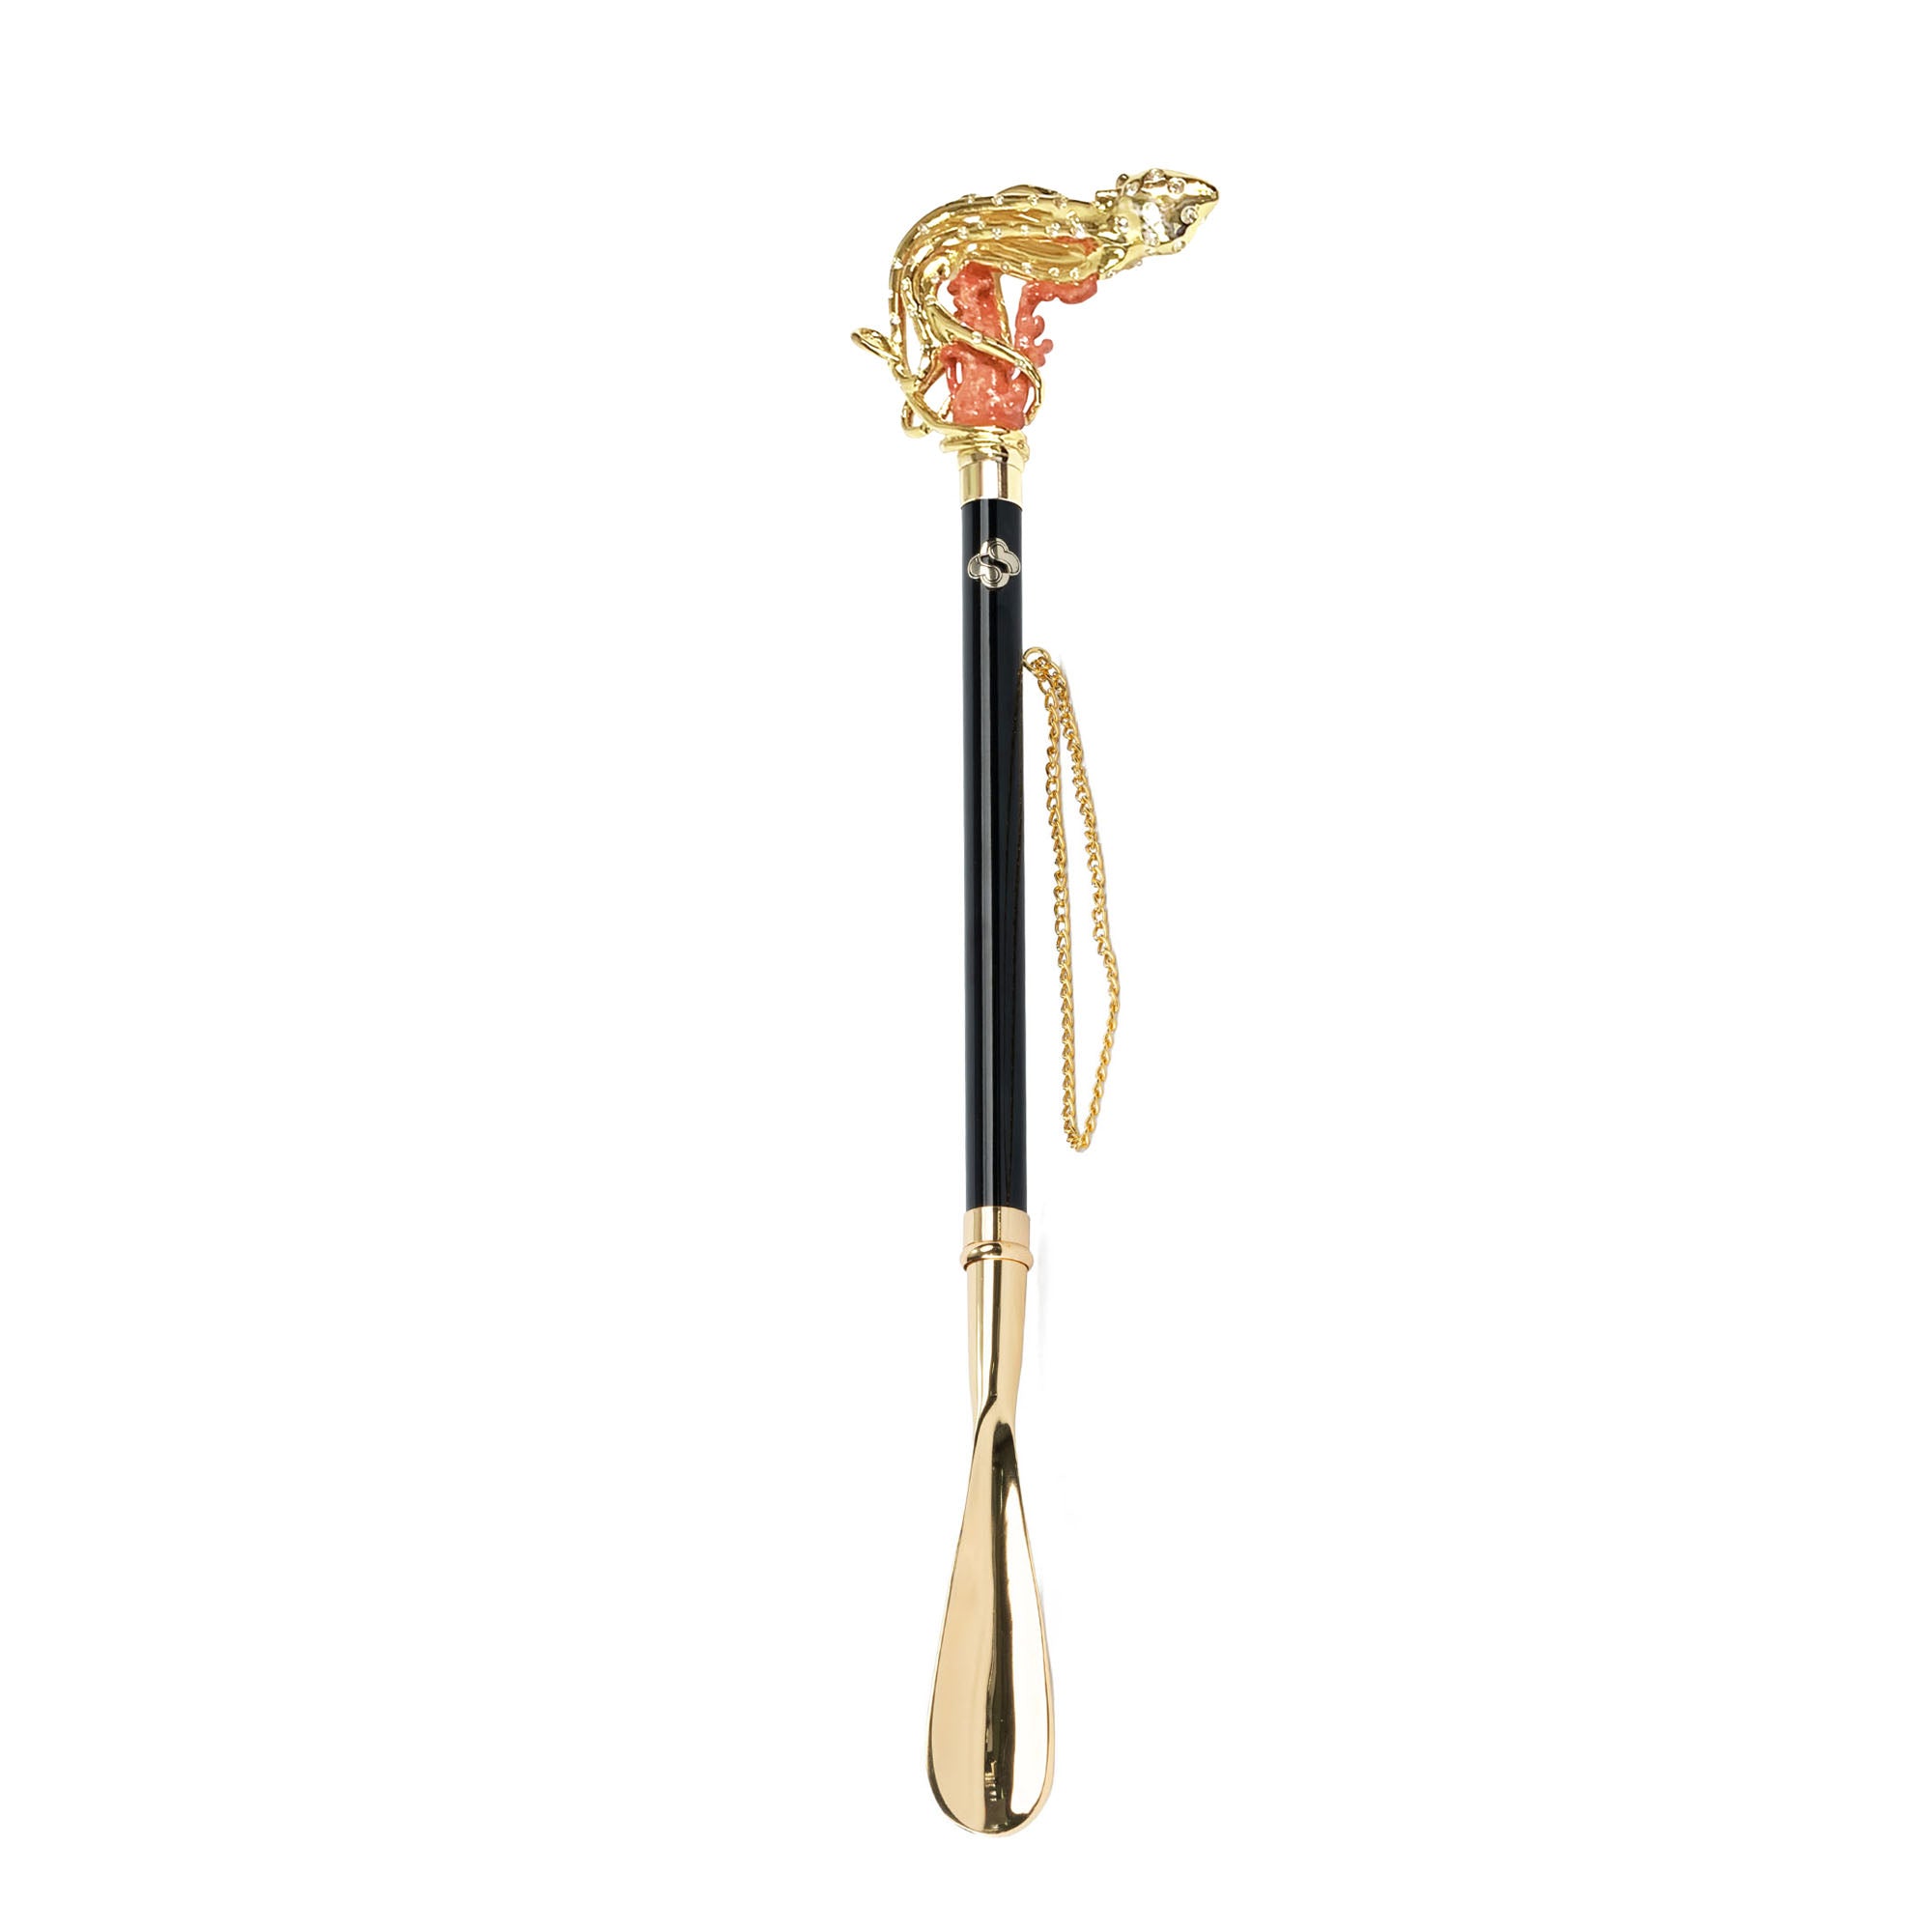 Golden Octopus: 24K Gold-Plated Shoehorn with Unique Tentacle Grip